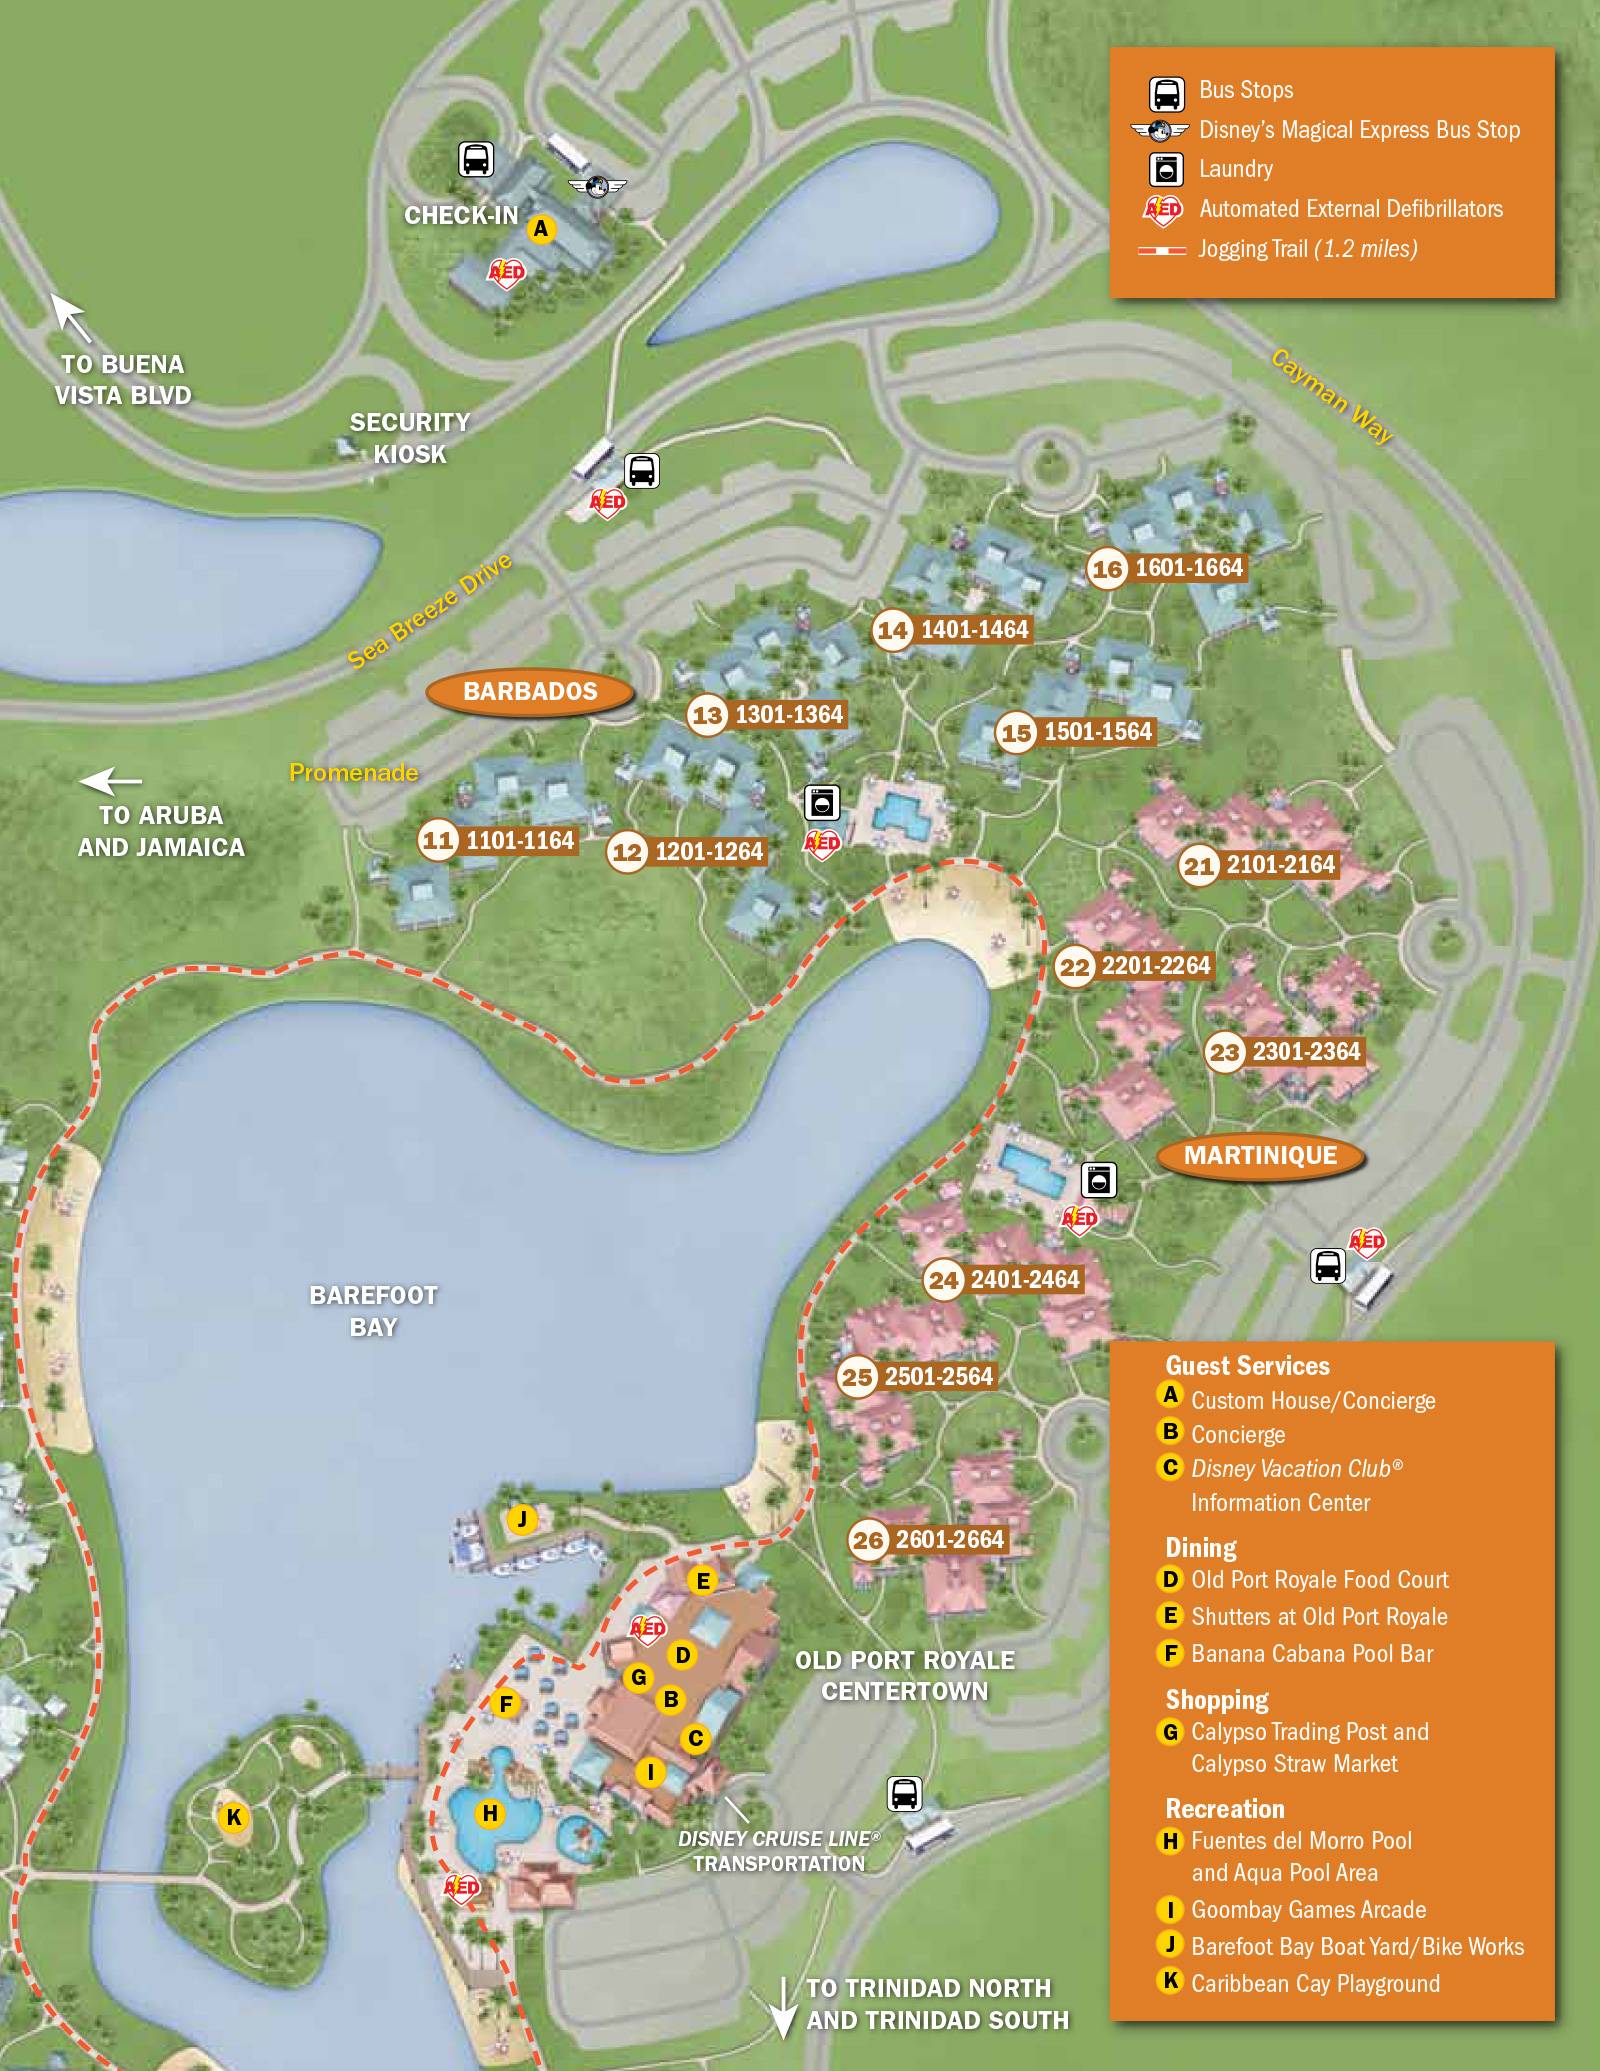 New 2013 Caribbean Beach Resort map - Martinique and Barbados